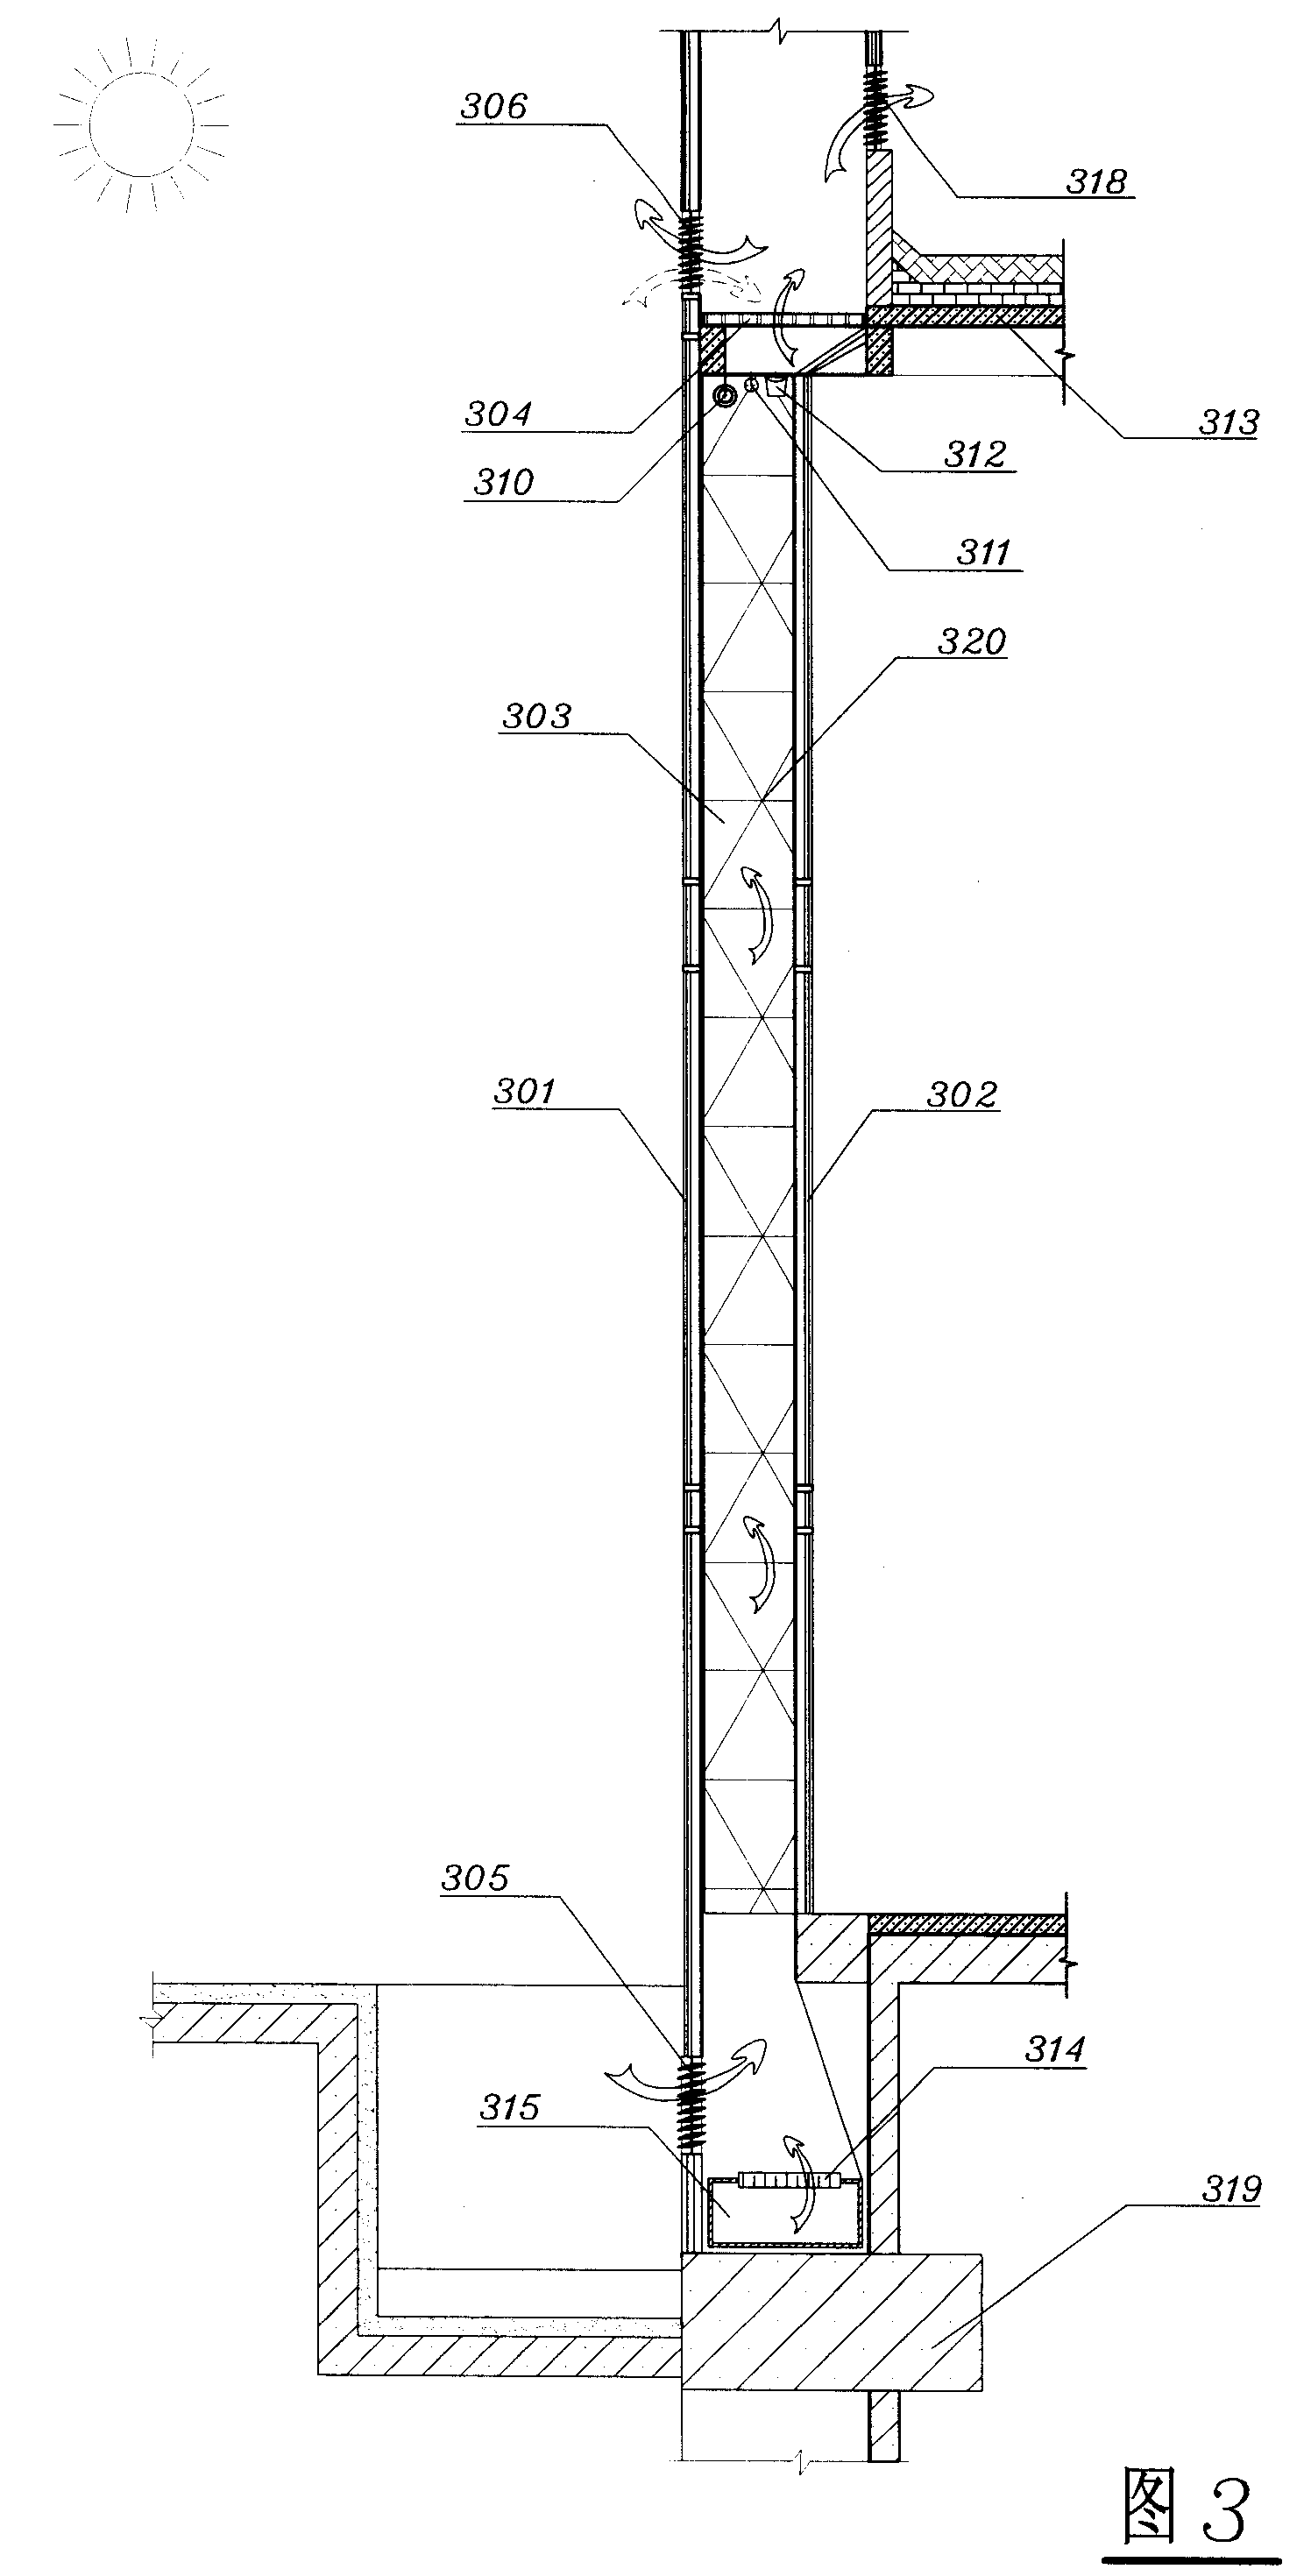 Double layer glass curtain aeration technology and method and structure